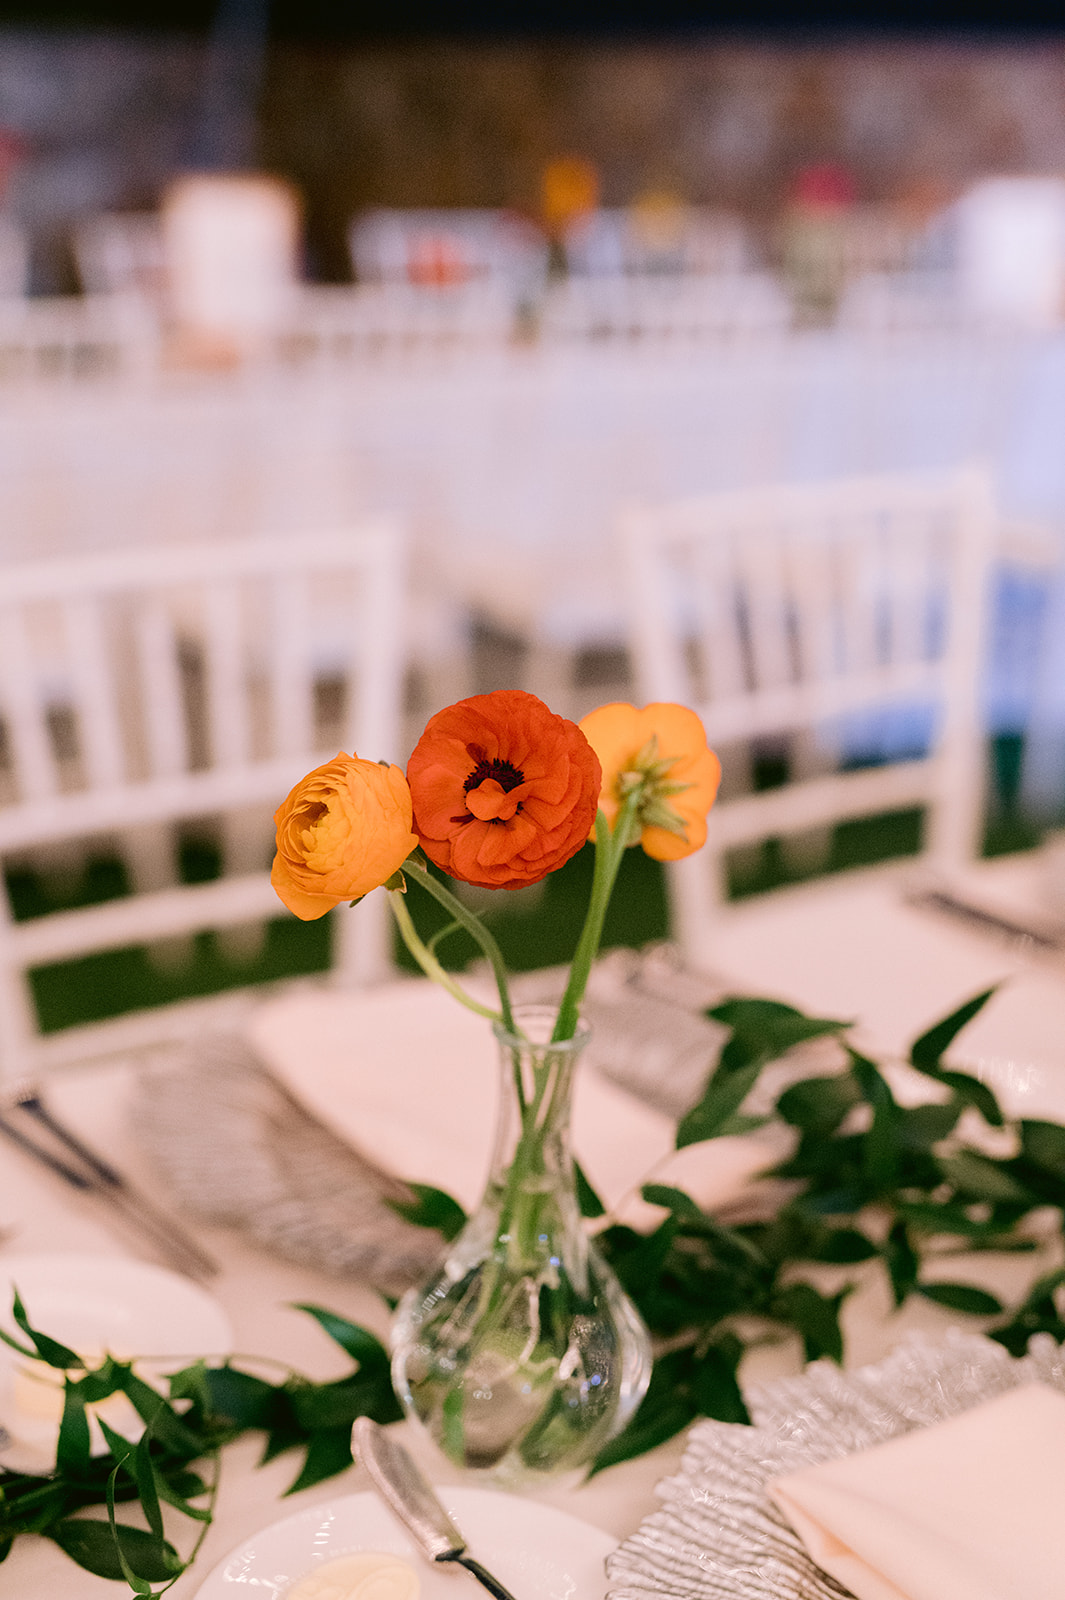 Wedding reception table centerpiece with yellow and orange poppies.